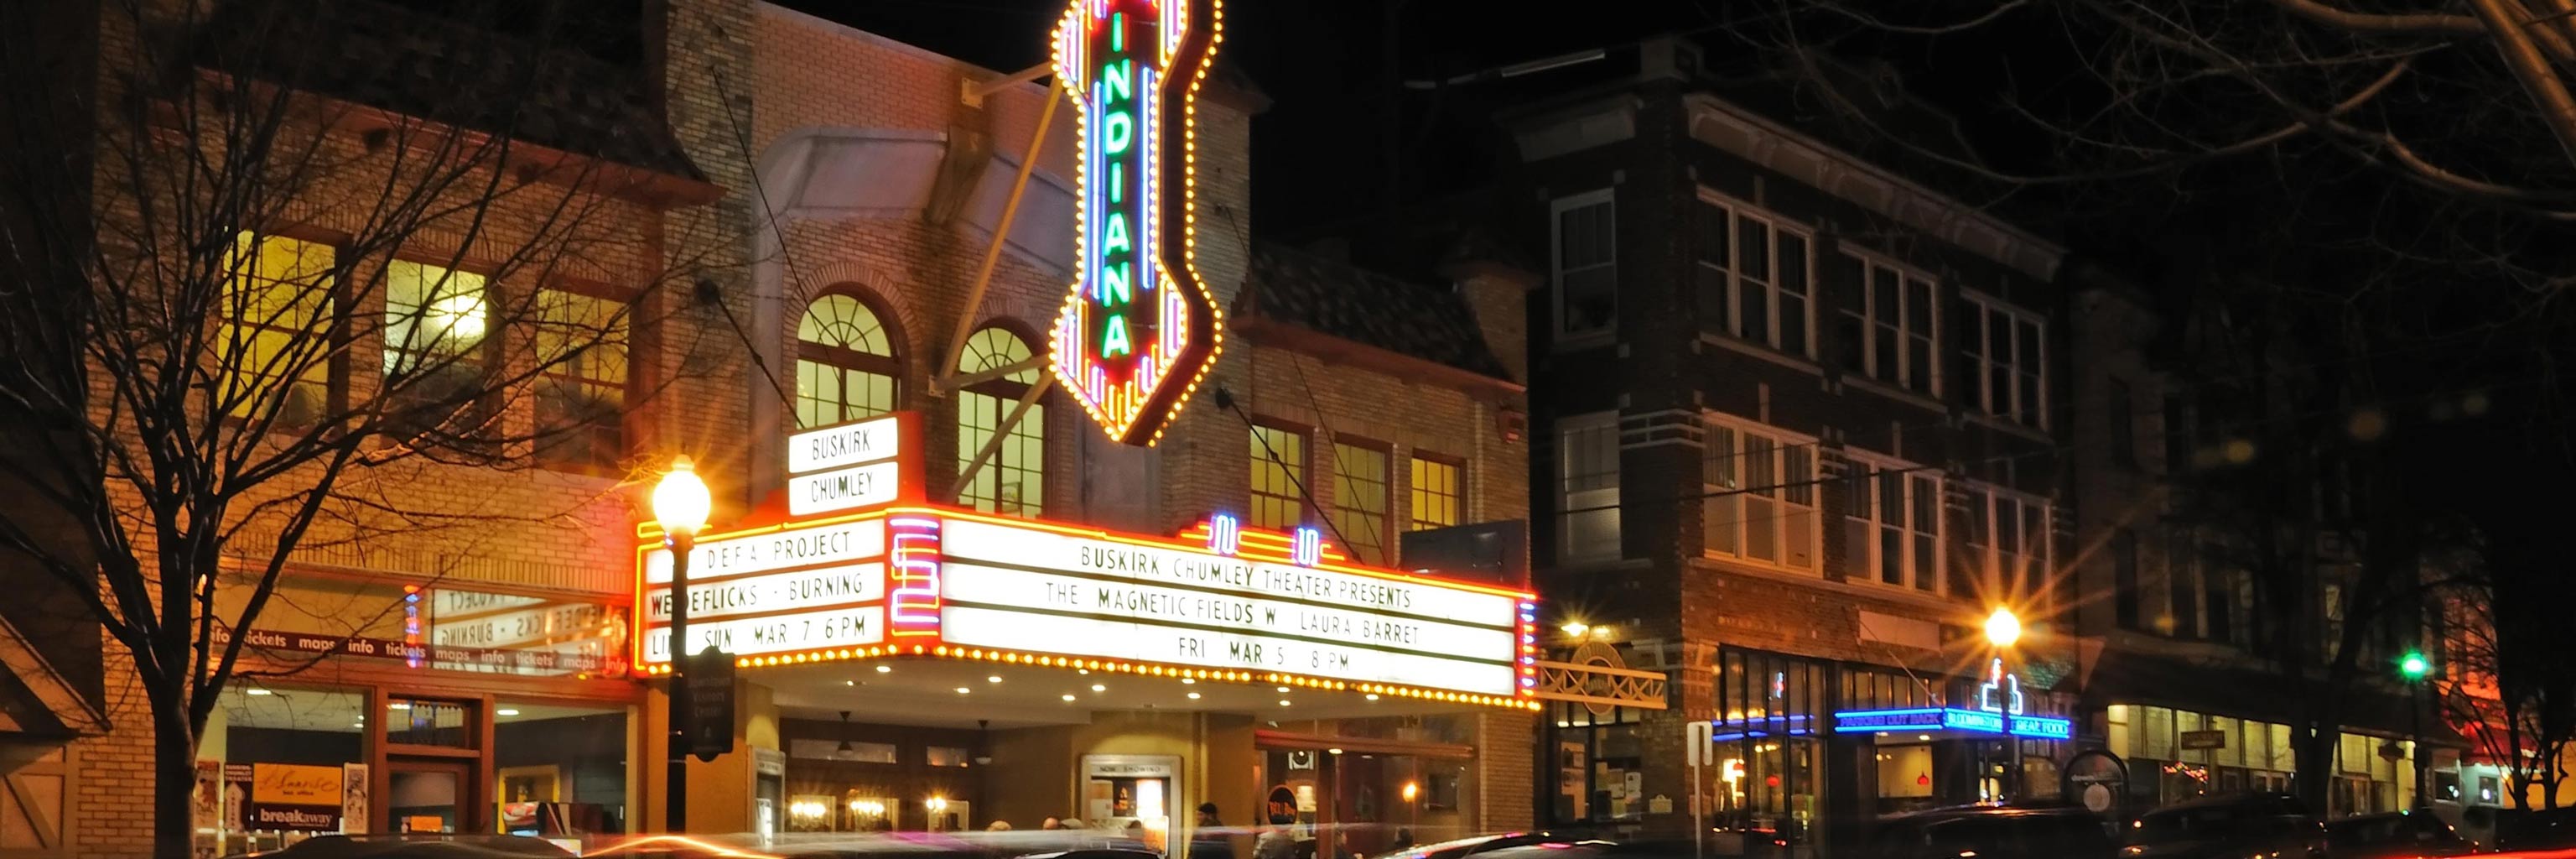 The Buskirk-Chumley Theater in downtown Bloomington